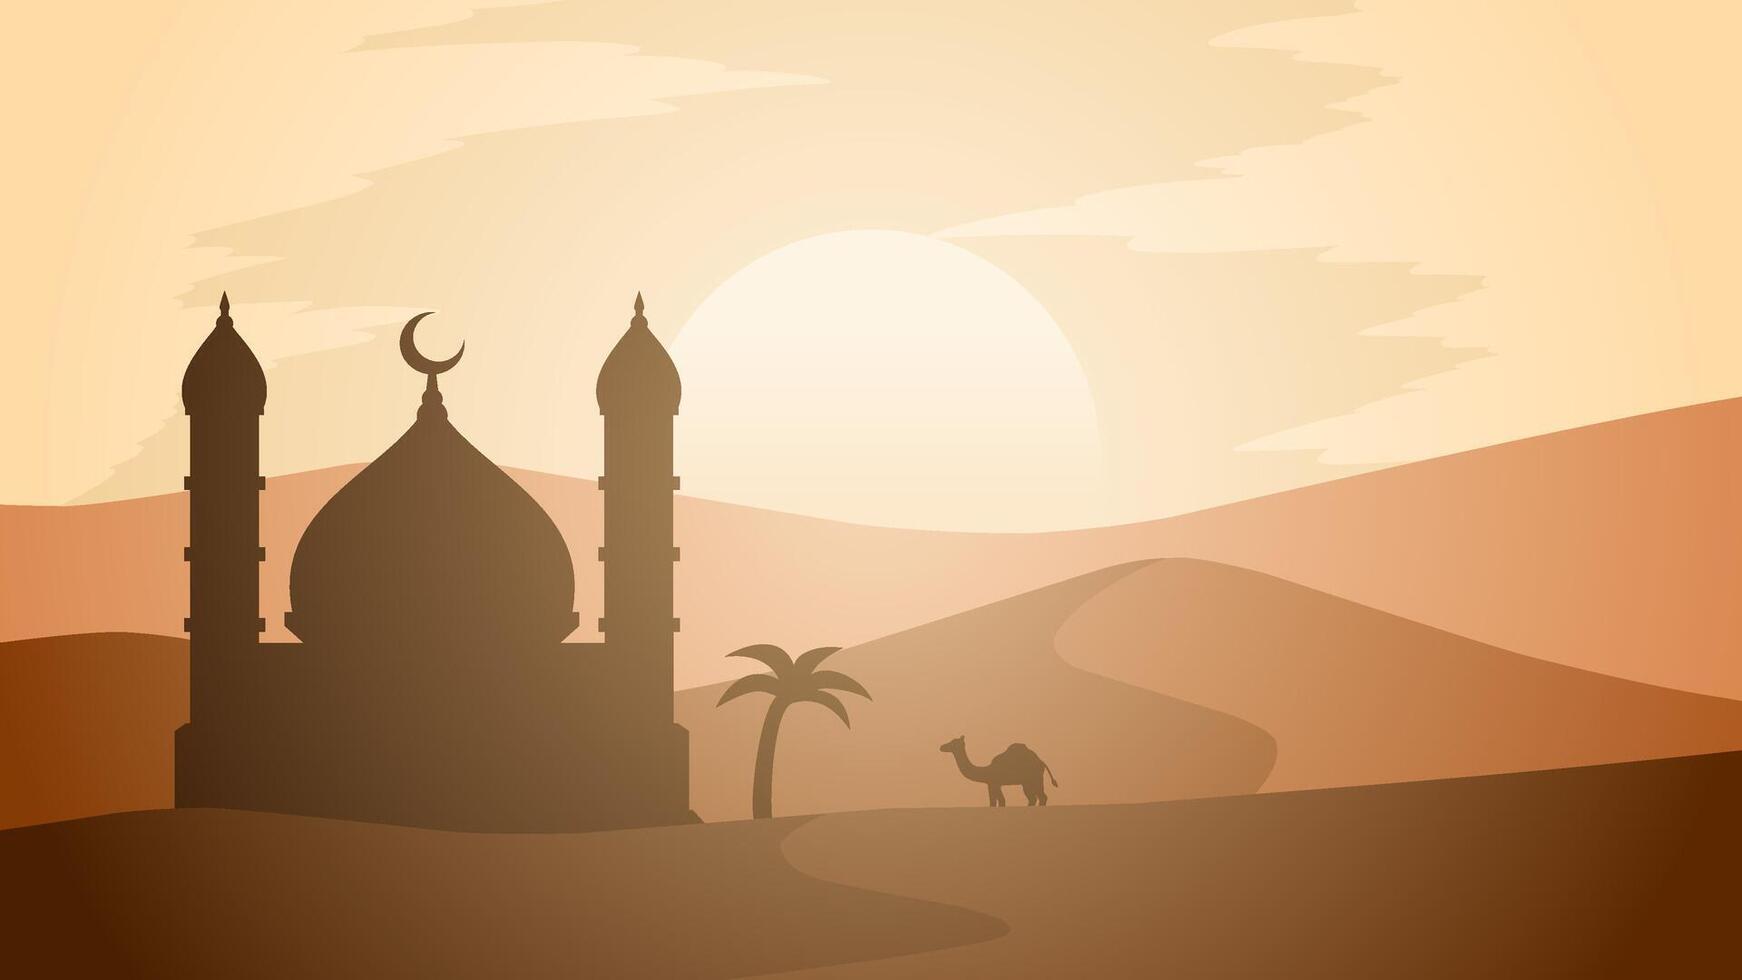 Ramadan landscape vector illustration. Mosque silhouette and camel at desert in the morning. Mosque landscape for illustration, background or ramadan. Eid mubarak landscape for ramadan event